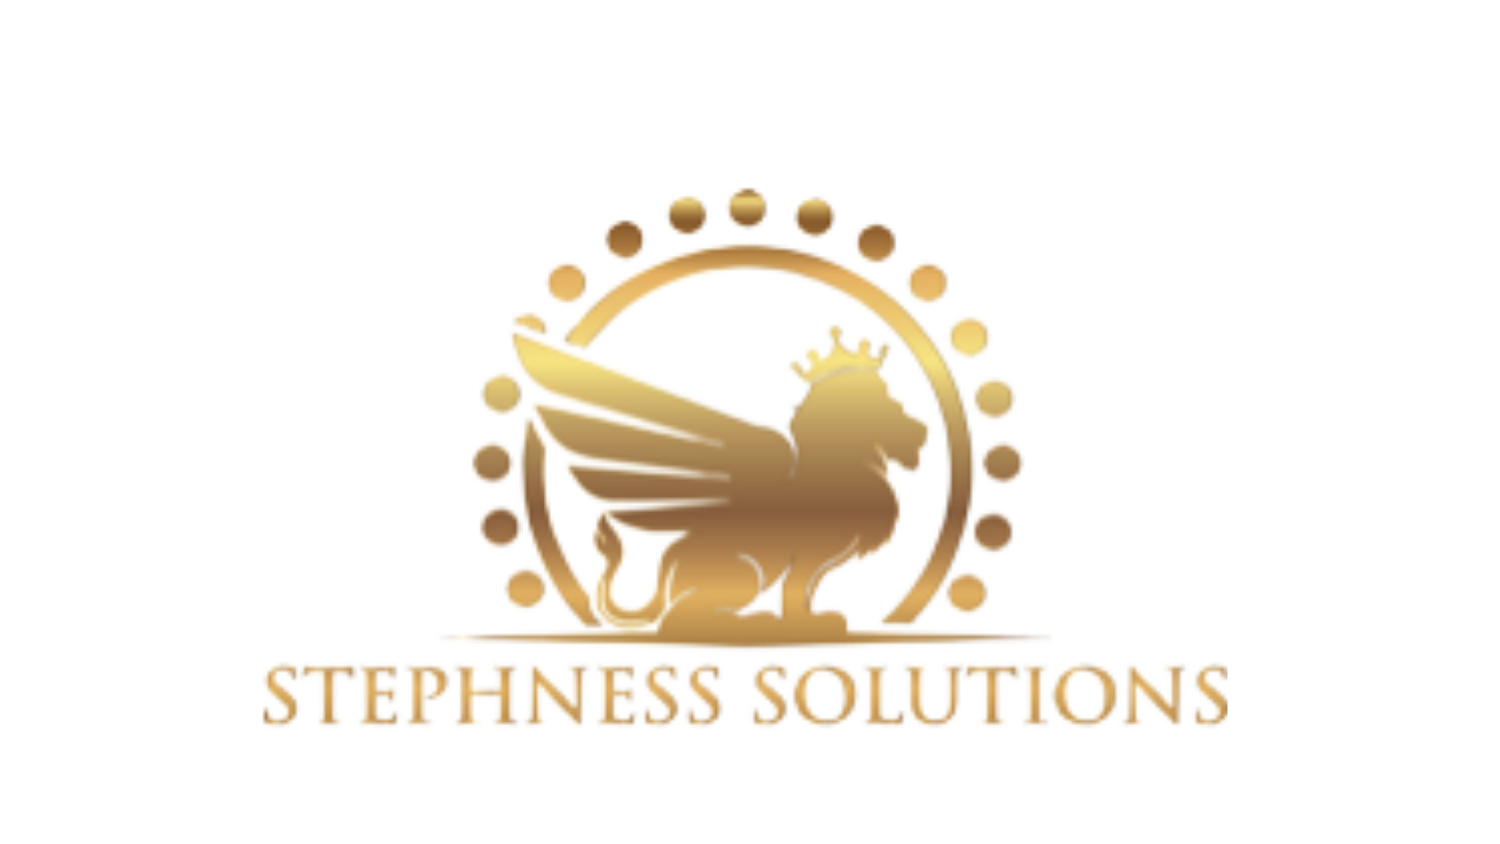 Stephness Solutions